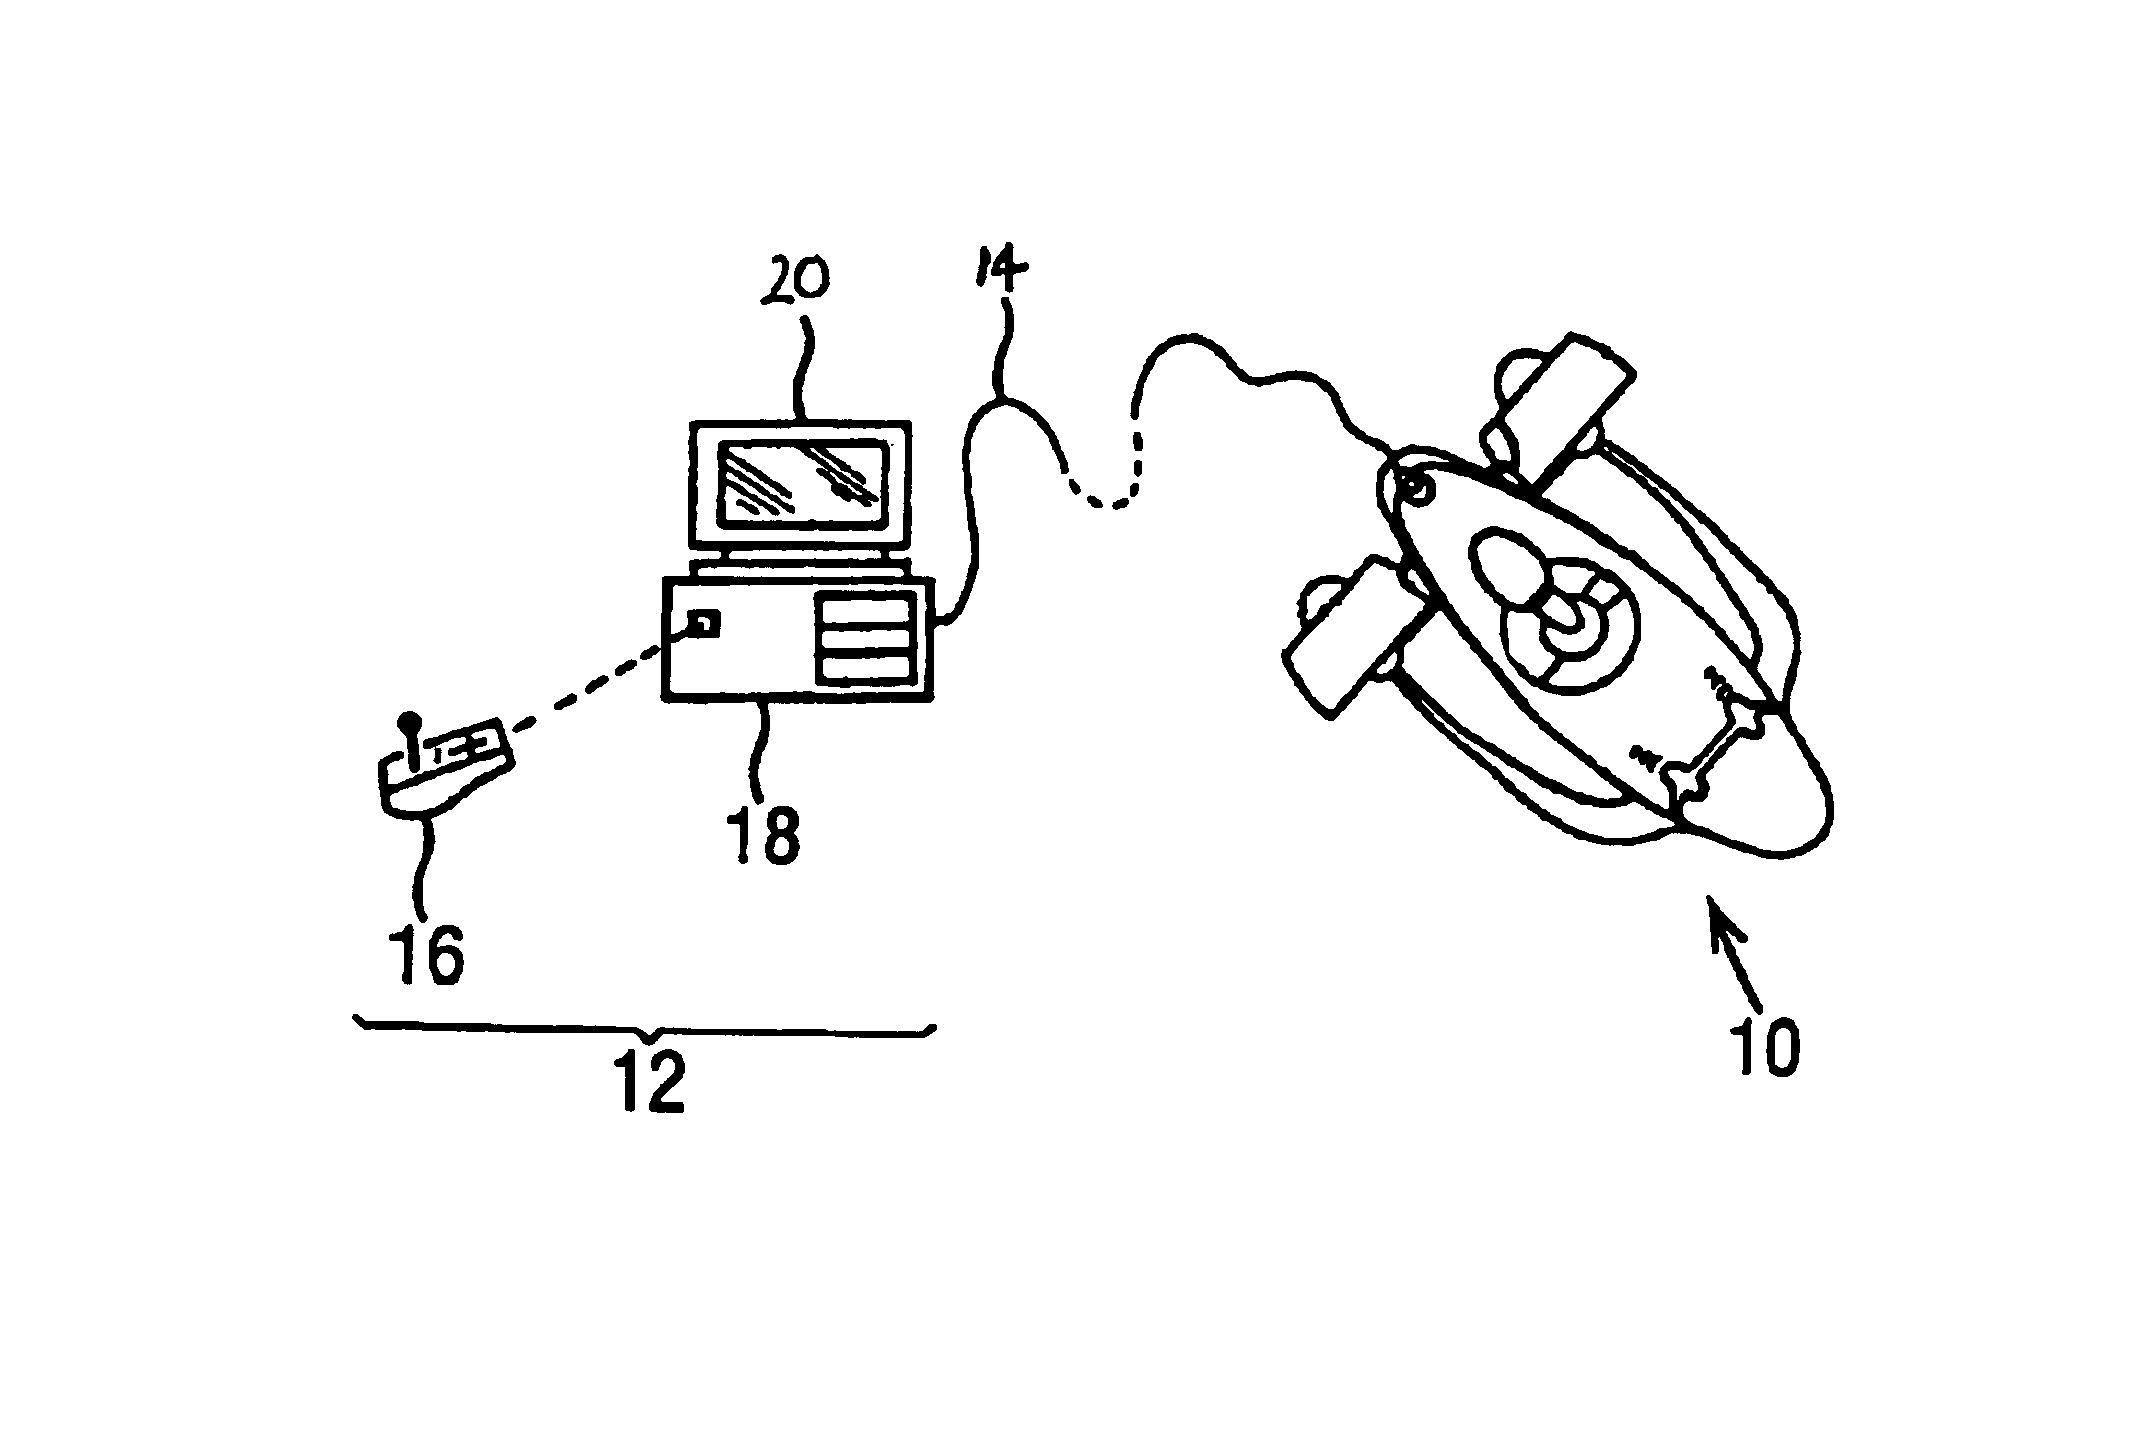 Location and movement of remote operated vehicles